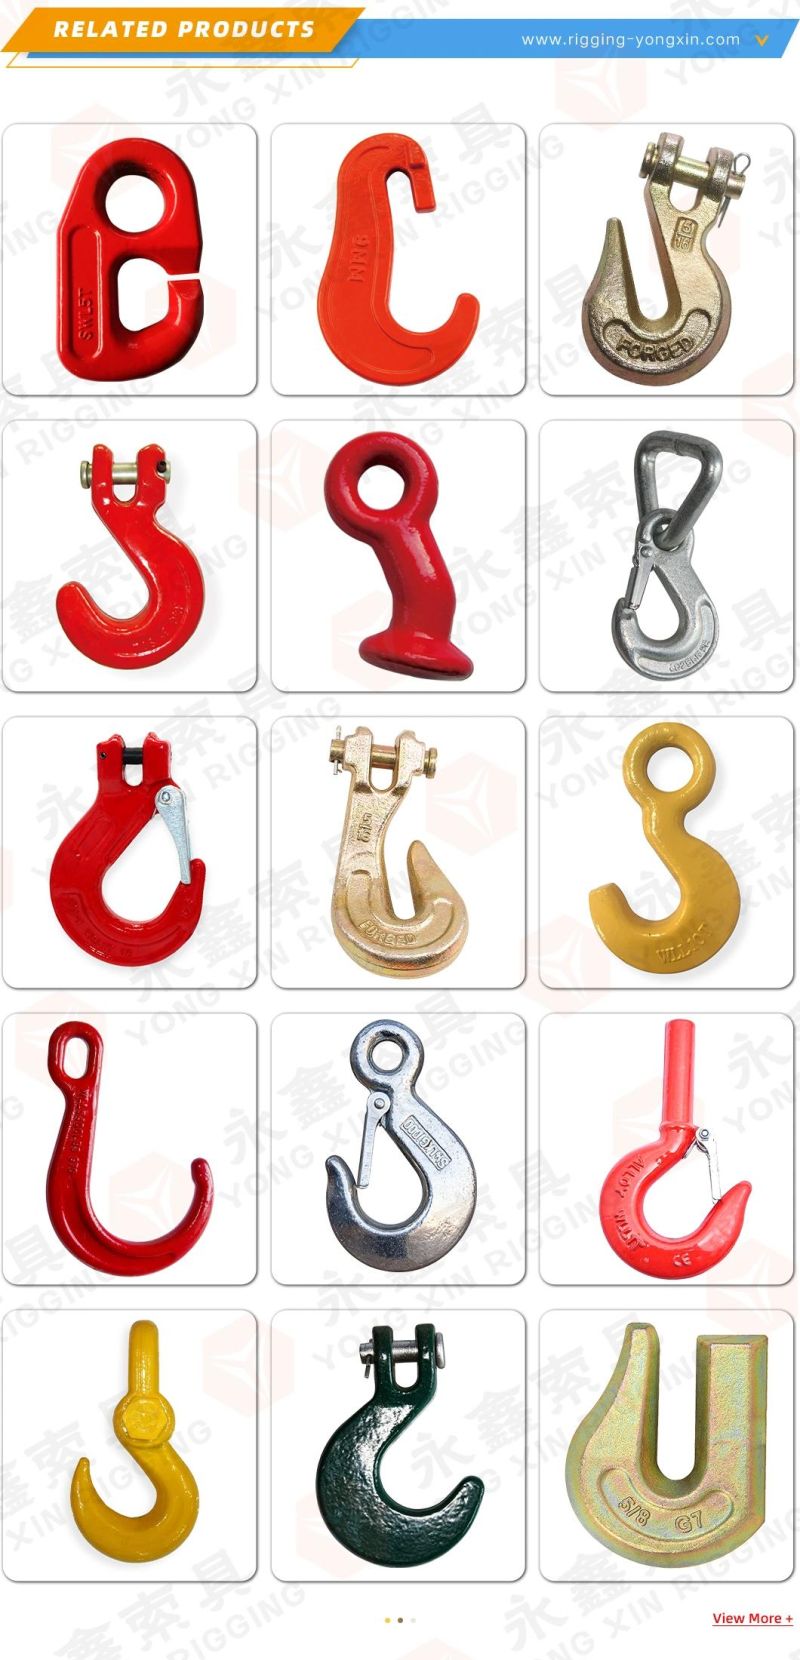 High Strength Alloy Steel Drop Forged Lifting Eye Hook/Lifting Hoist Hook/Eye Safety Hook with Safety Latch